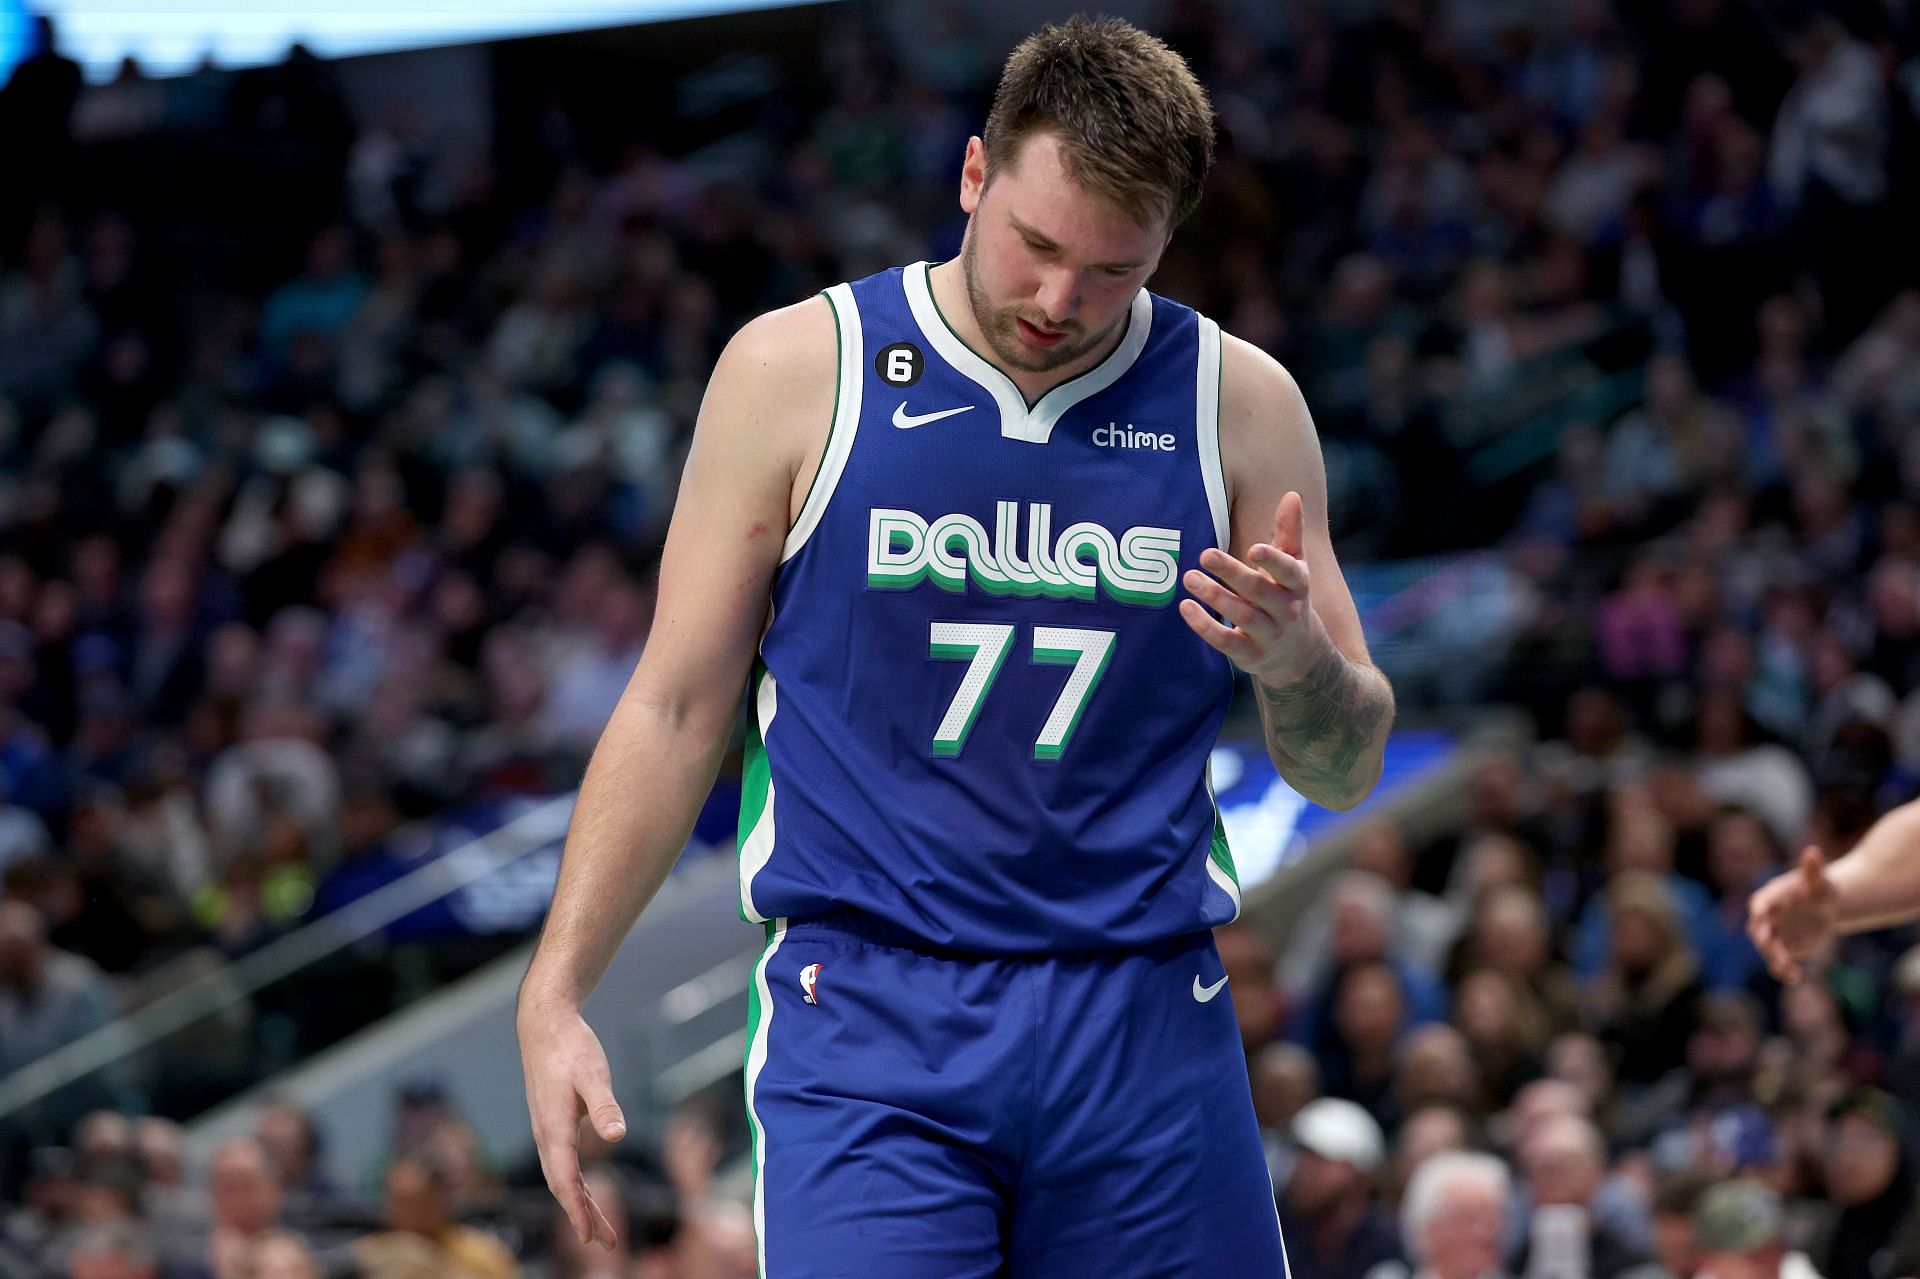 Luka Doncic is treating a sprained left ankle.